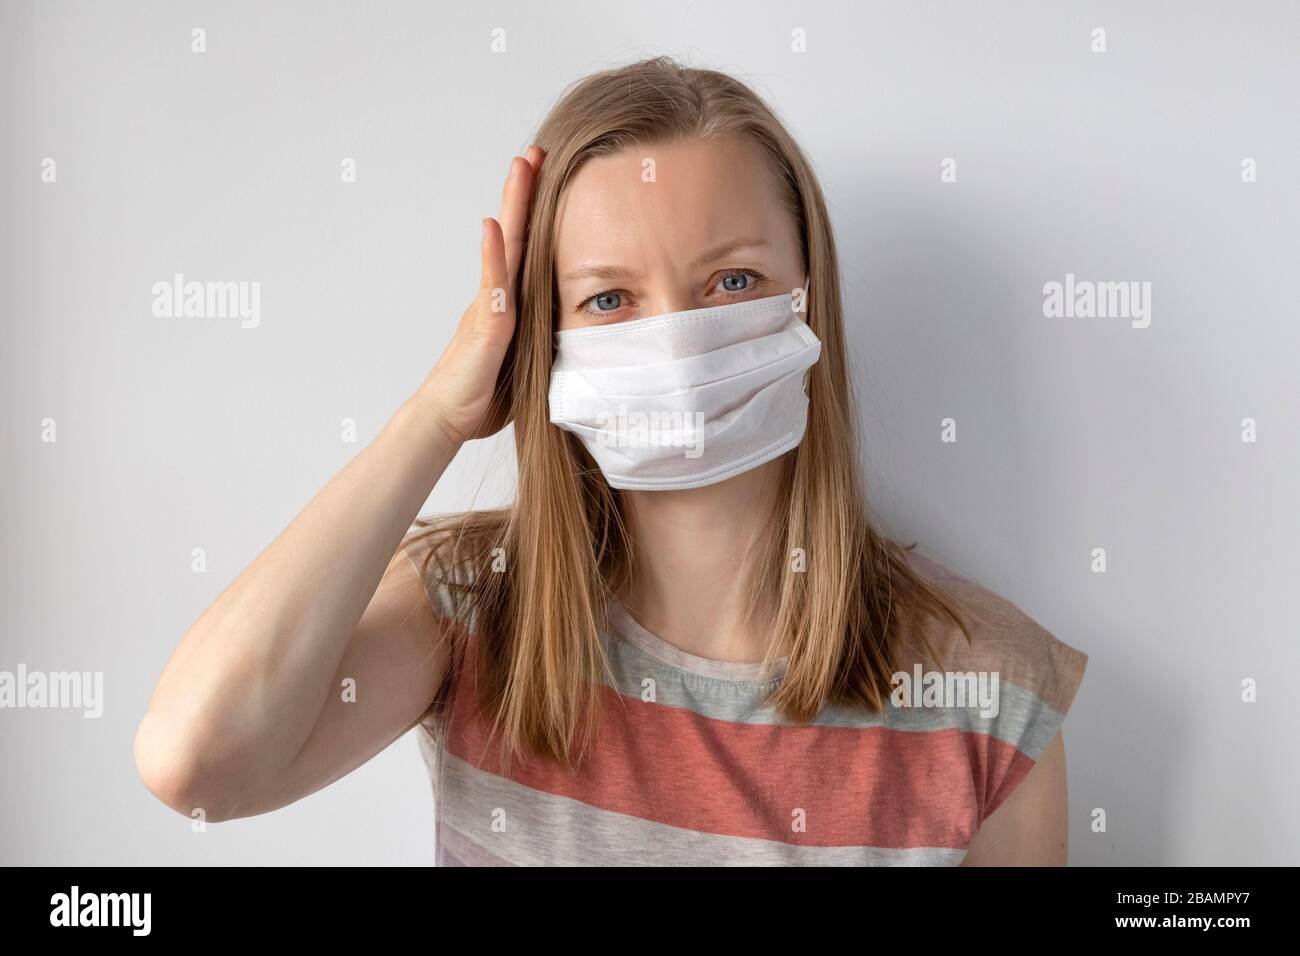 Sick woman wearing medical mask for protection Stock Photo